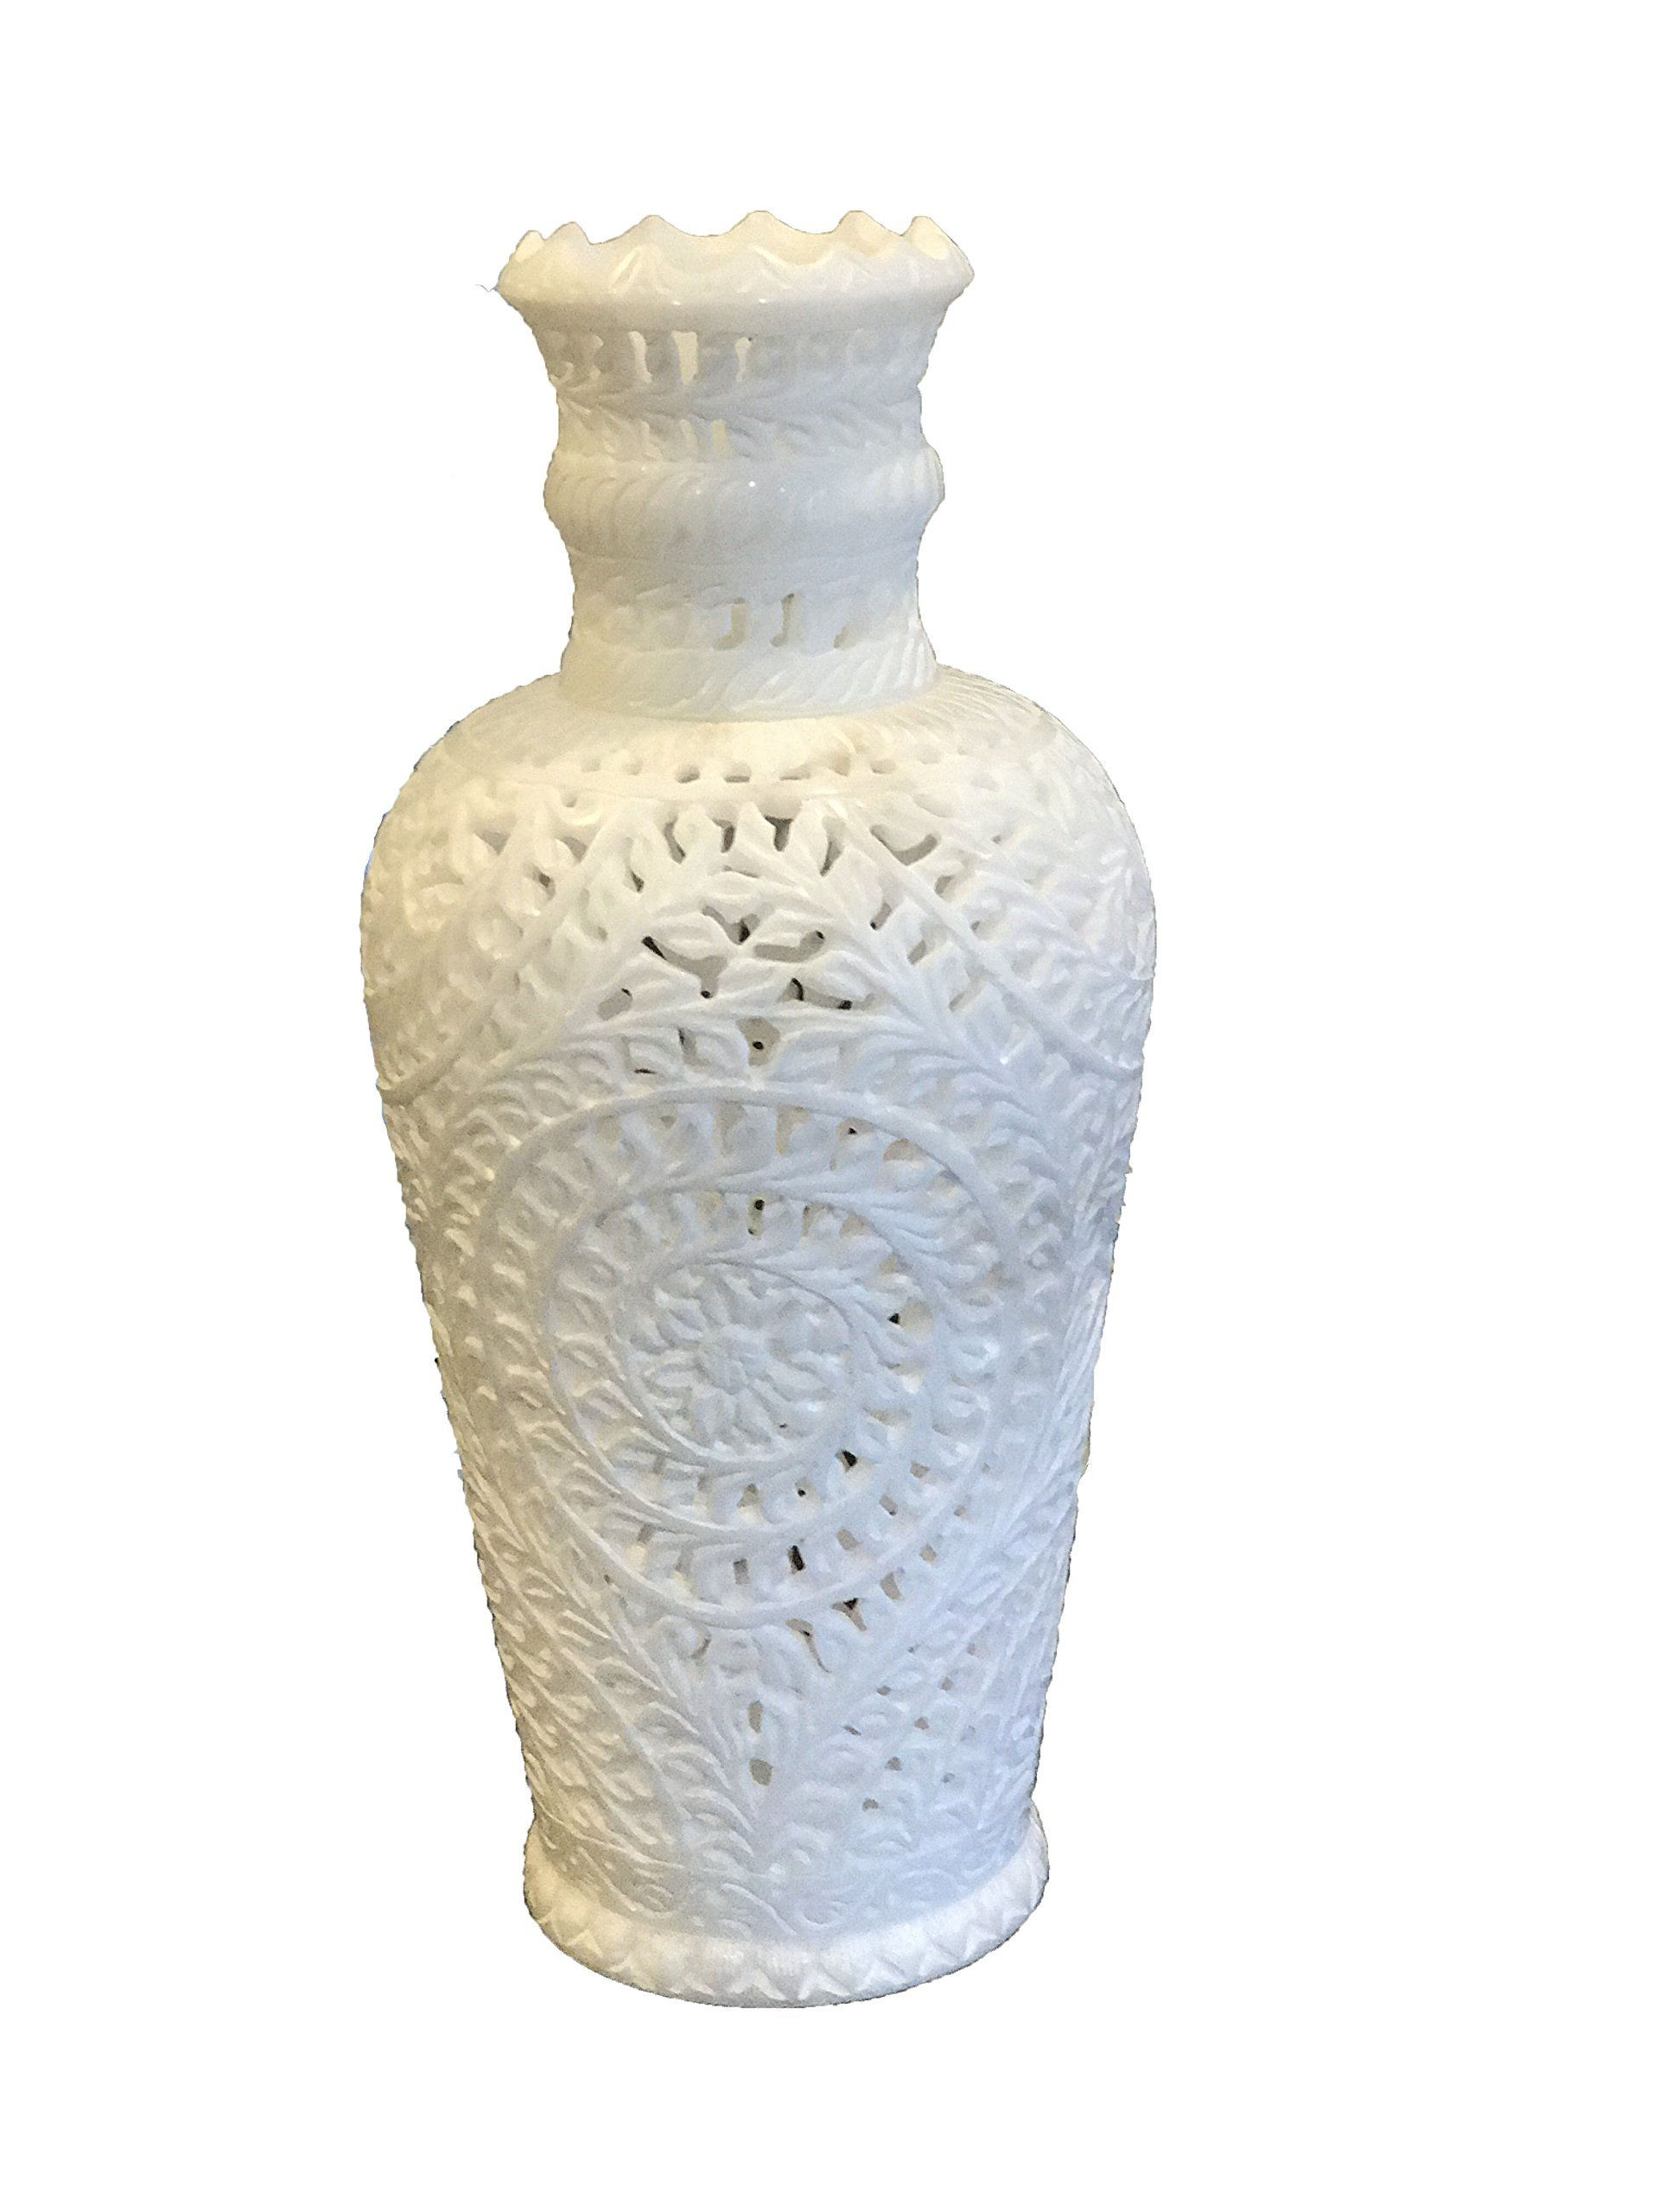 lenox vases for sale of white marble flower vase handcrafted stone decorative wedding diy within white marble flower vase handcrafted stone decorative wedding diy vases handcrafted by artisans this